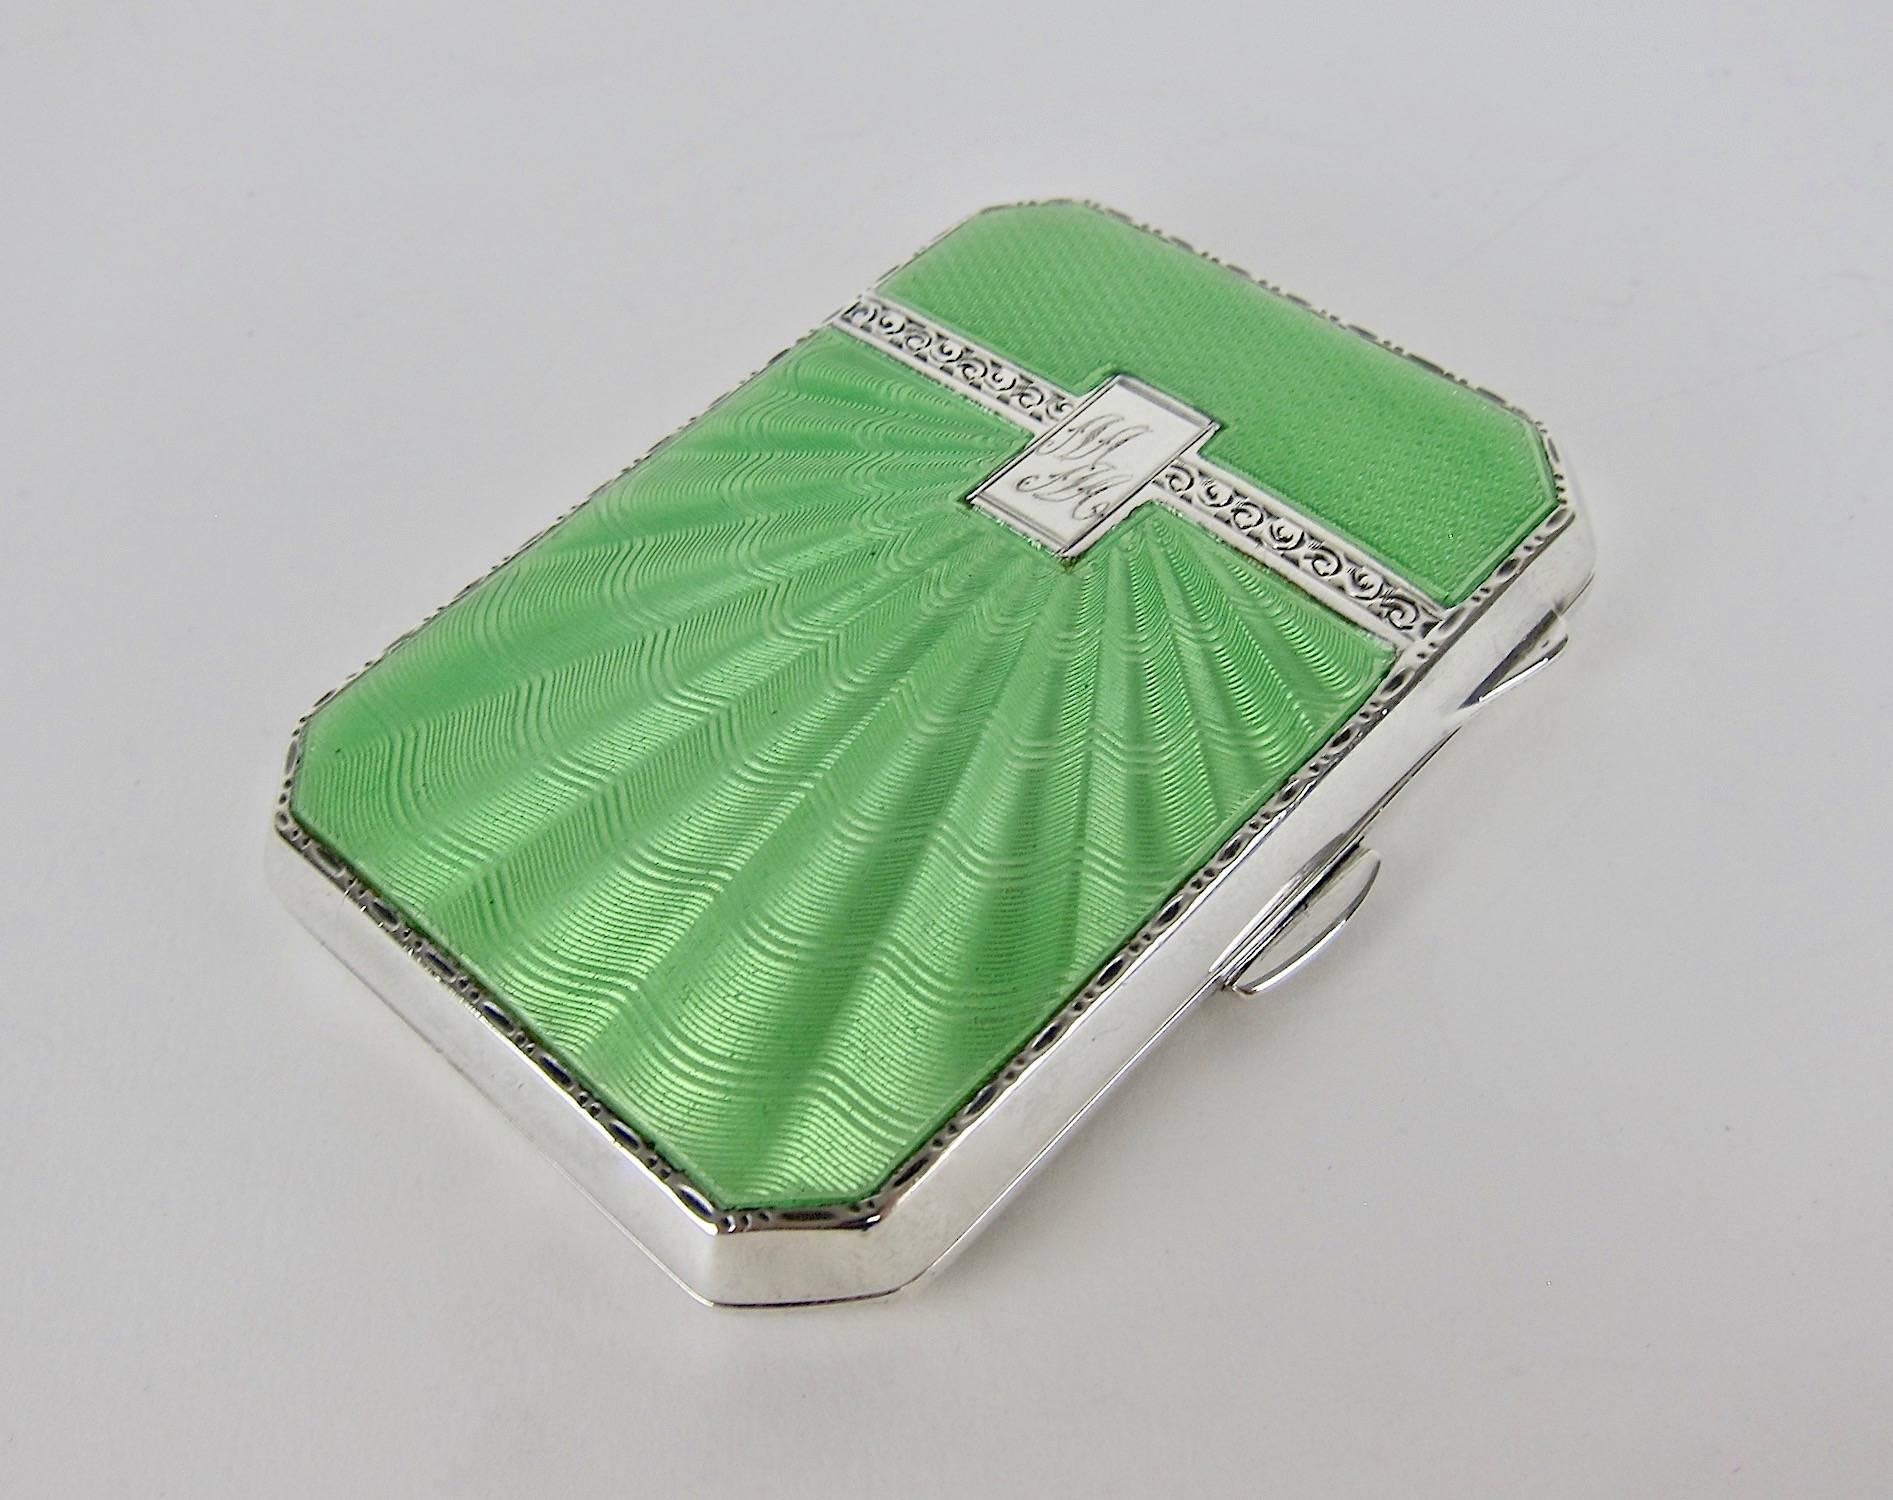 An English Art Deco ladies cigarette case in sterling silver and apple green enamel by Joseph Gloster Ltd., Lion Silver Works, Hockley Hill, Birmingham. The top of the vintage case is decorated with two fields of guilloche enamel separated by a